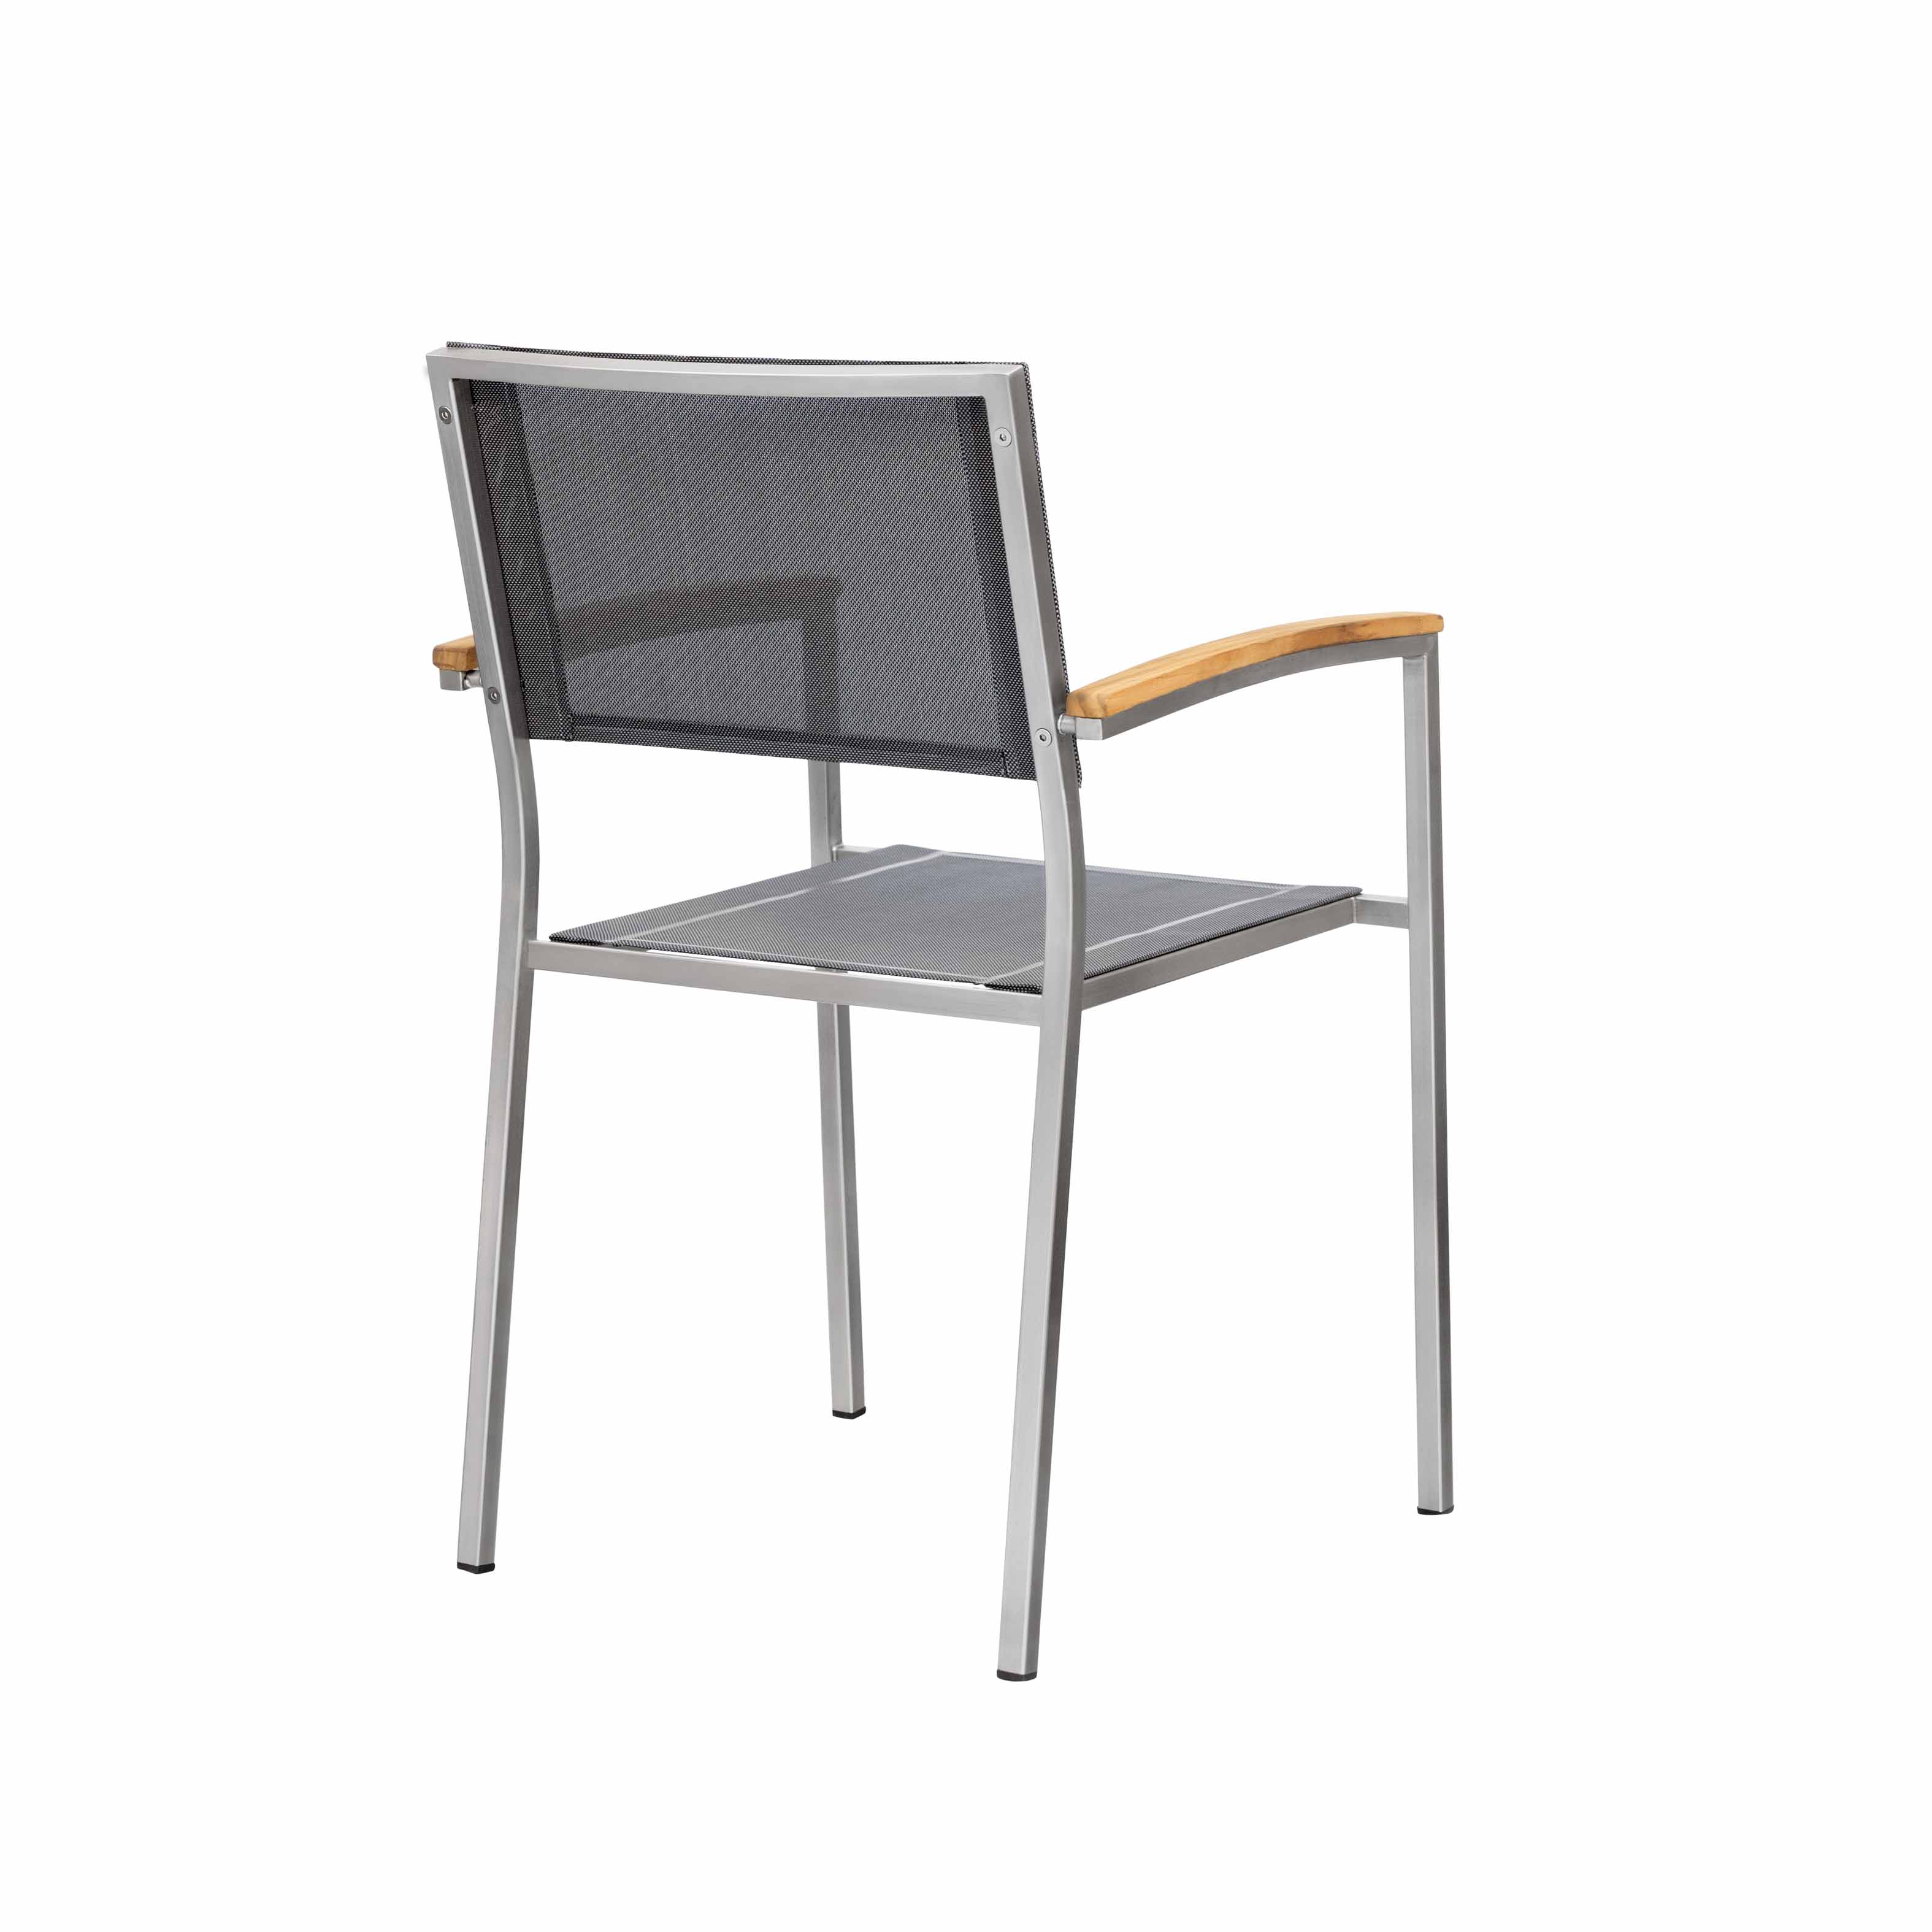 TL2021 Hills dining chair S2